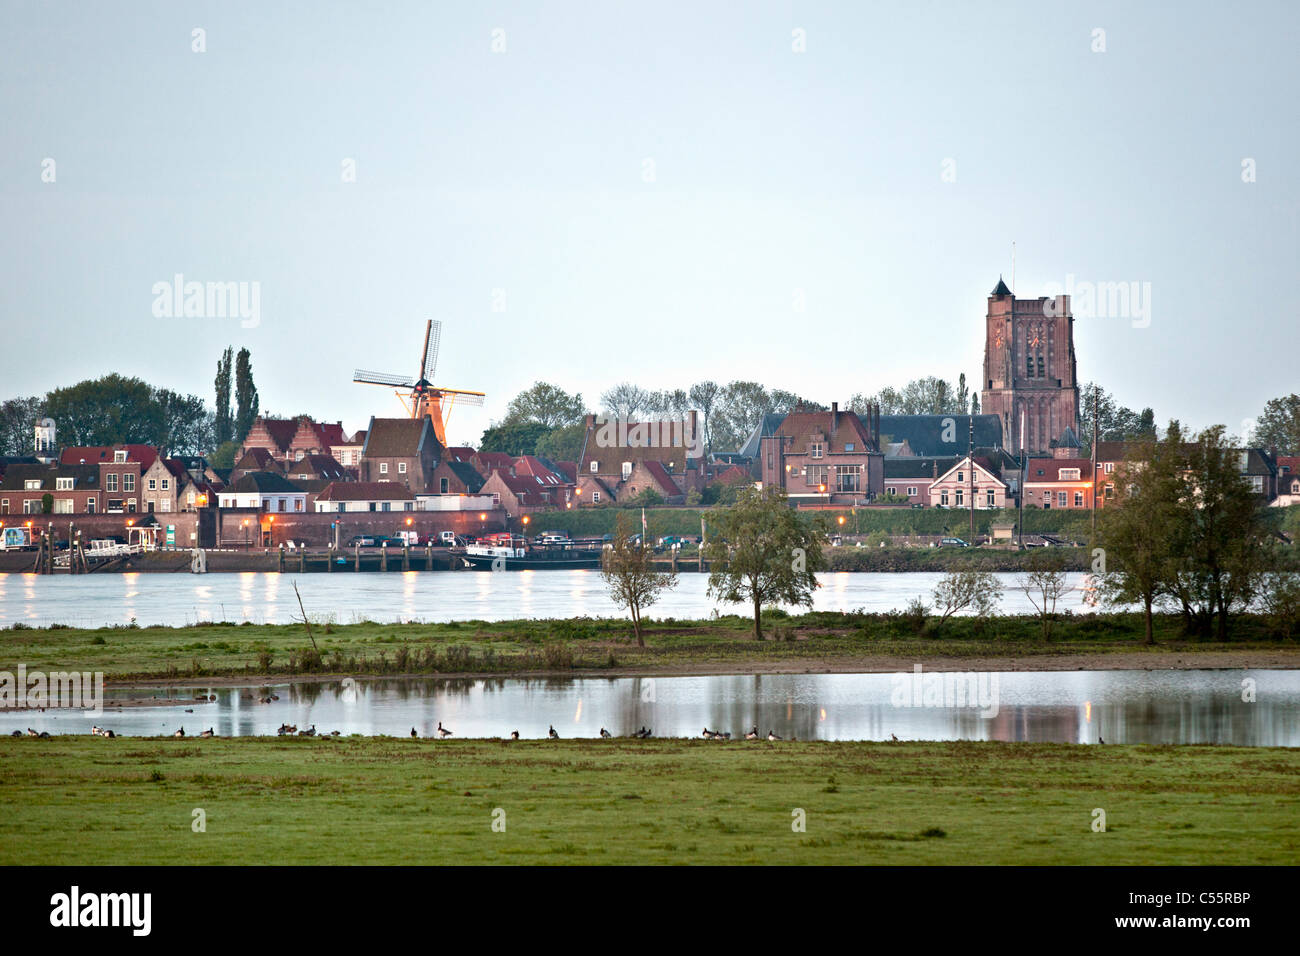 The Netherlands, Woudrichem, Skyline at dawn. River called Maas. Stock Photo